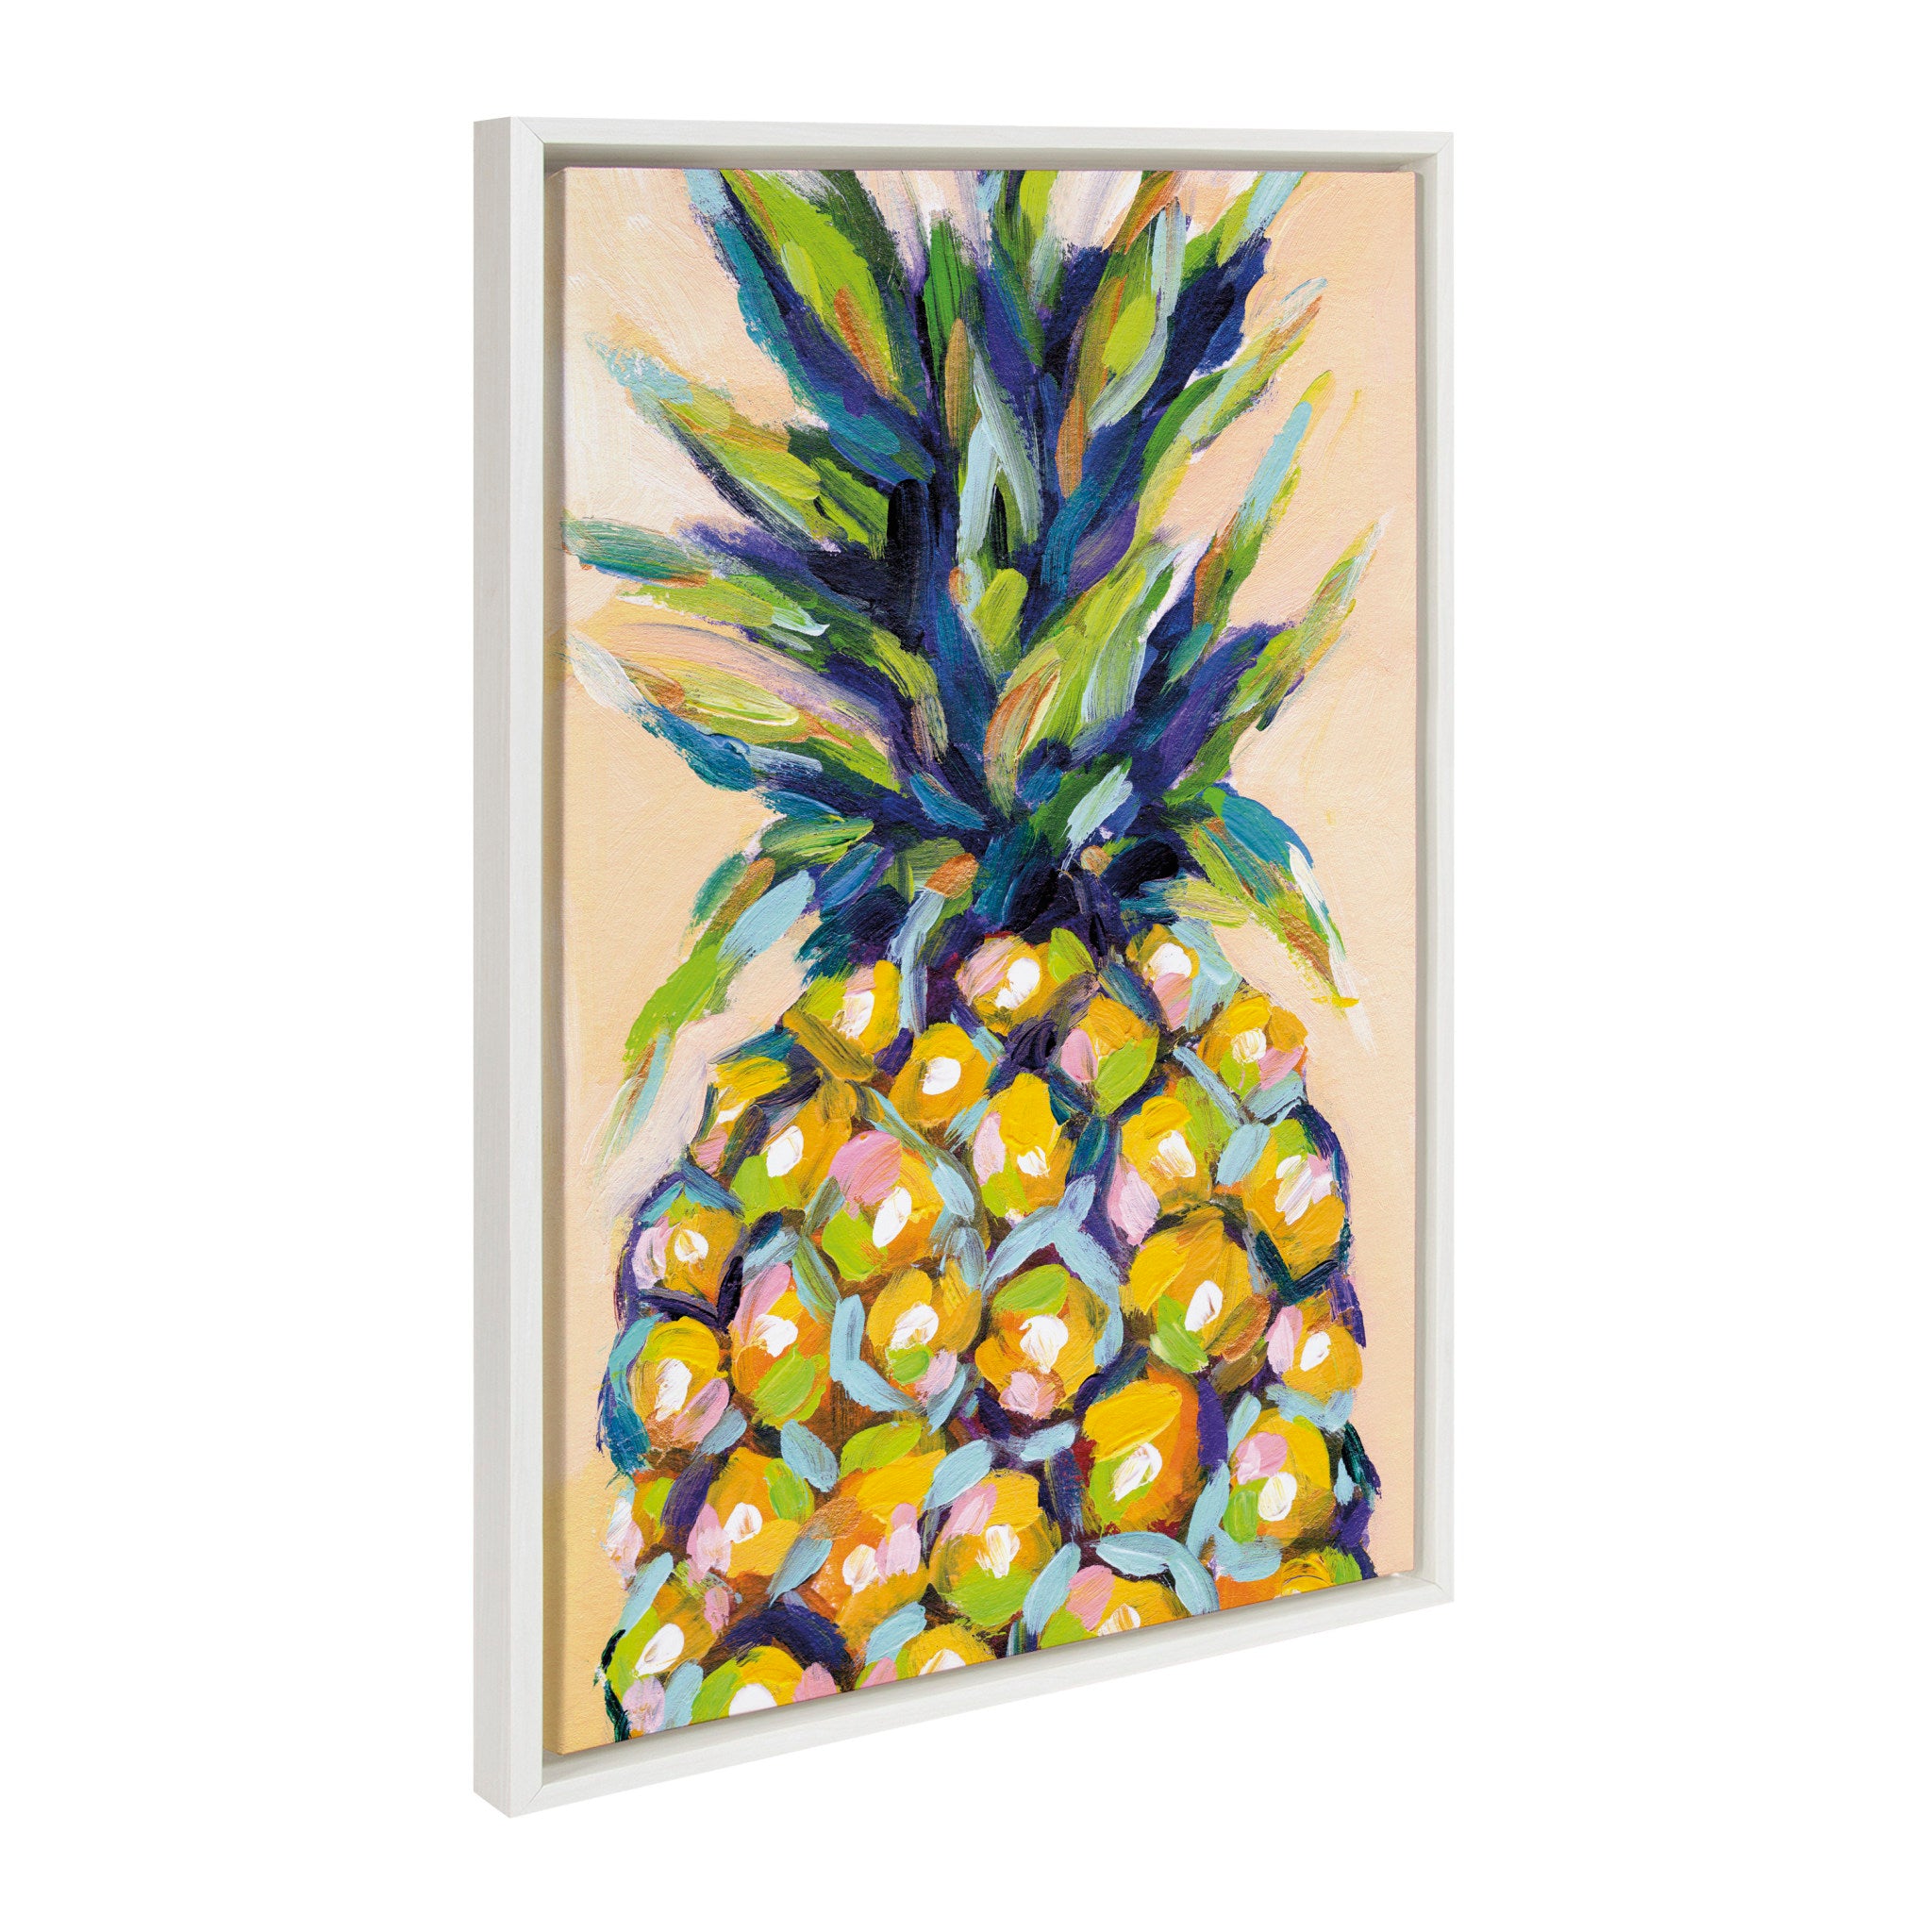 Sylvie Pineapple Study No 2, Apache Junction Sunset and Sunset Sea Turtle Framed Canvas Art Set by Rachel Christopoulos